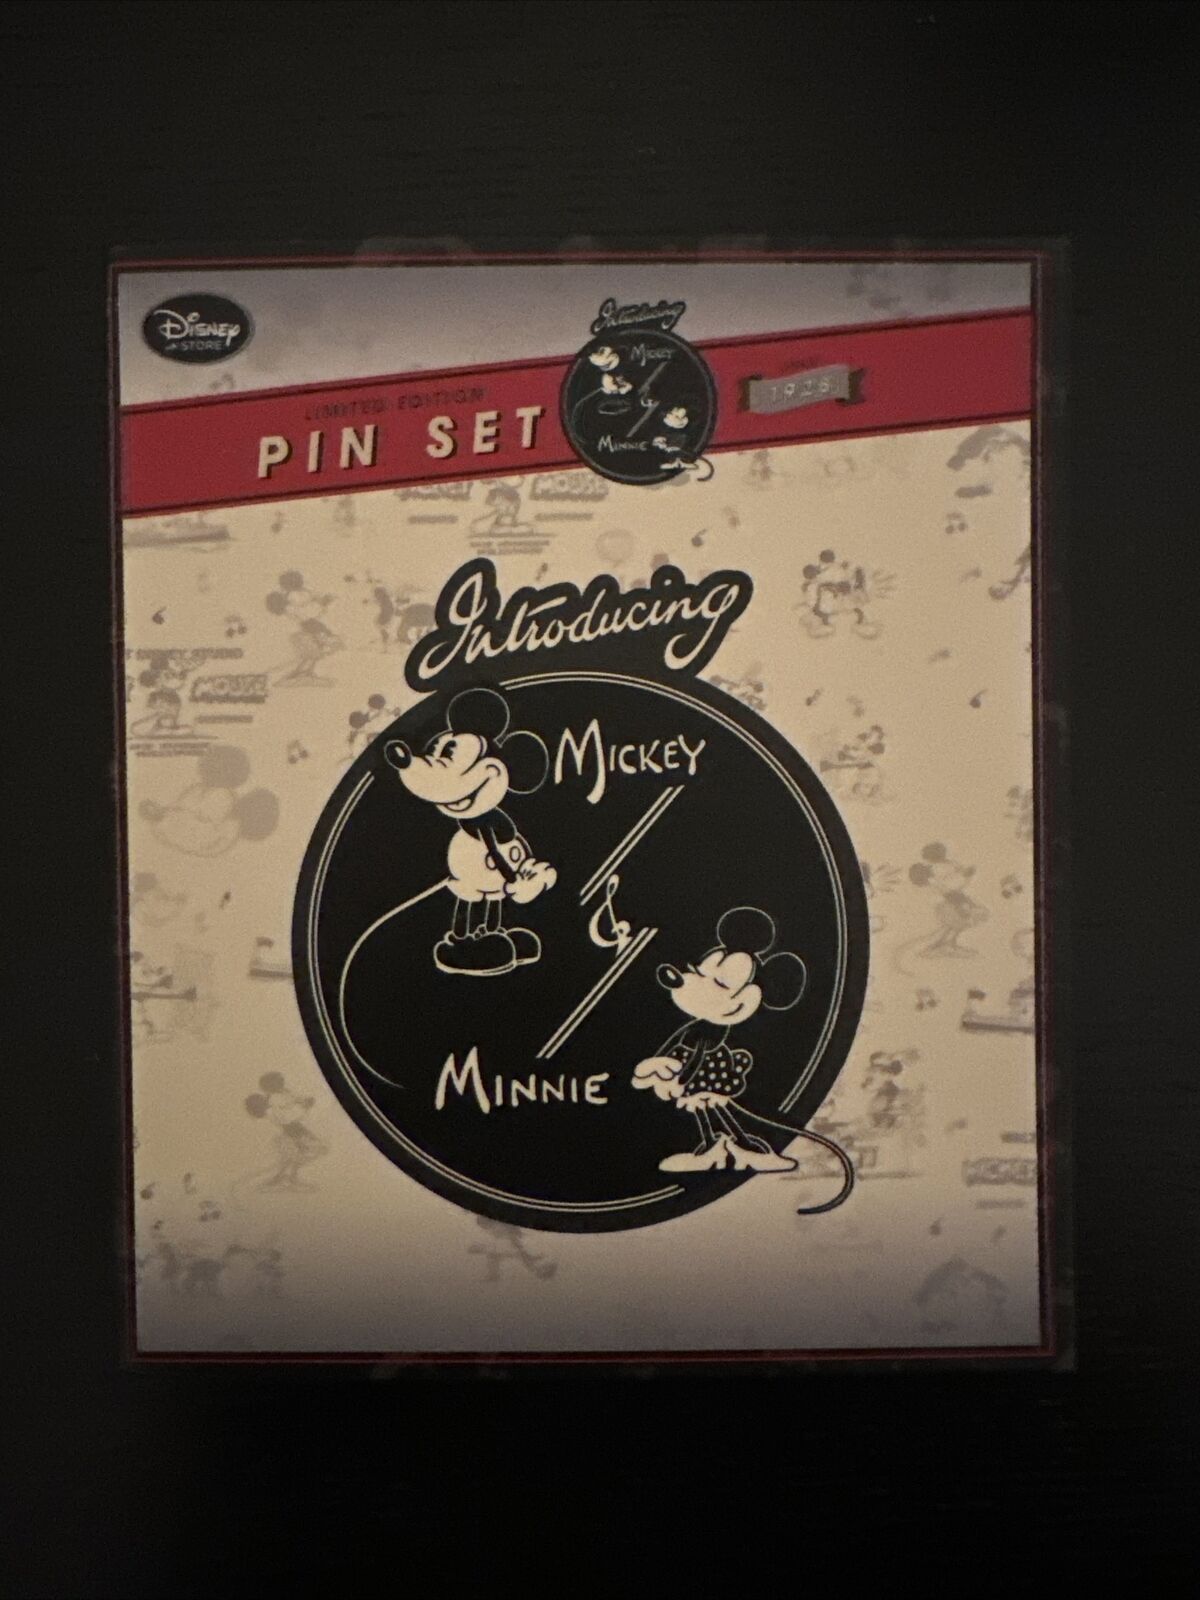 Introducing Mickey & Minnie Pin Set (D23 Expo Exclusive) 1/250 EXTREMELY RARE